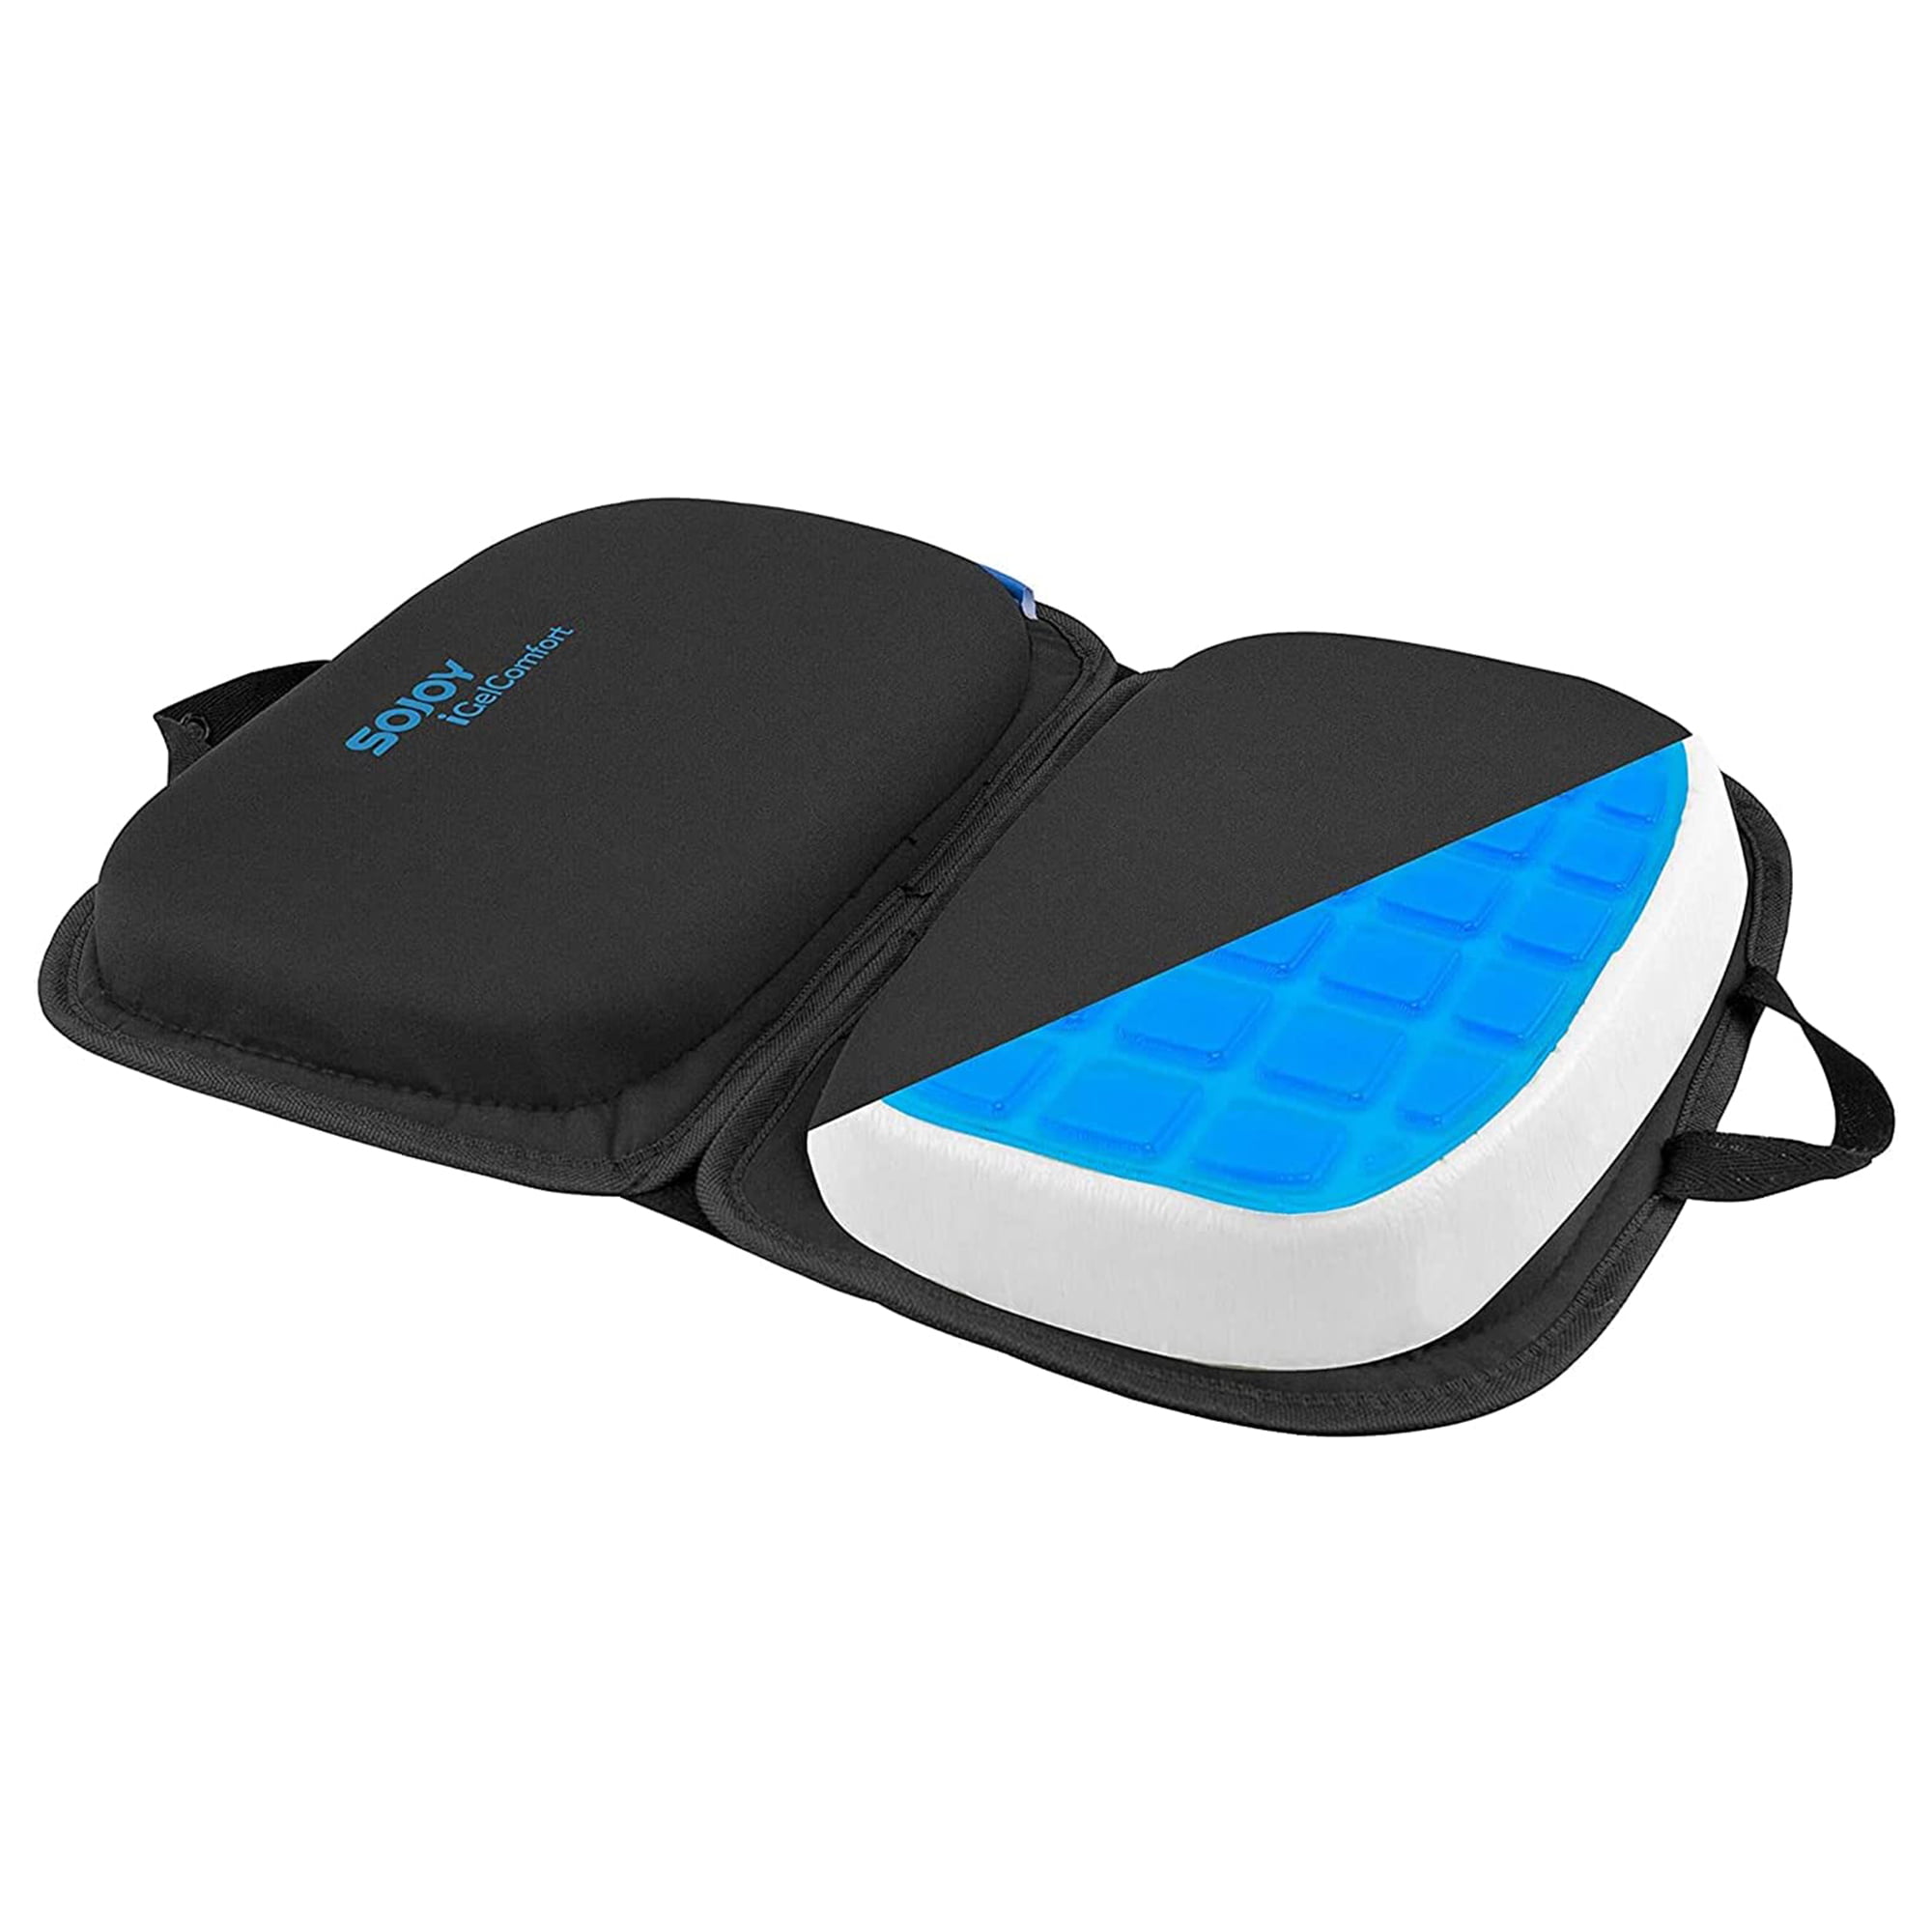 Can I bring a seat cushion on a plane?  Comfi-Life Gel is the #1 Best seat  Cushion for airplanes 